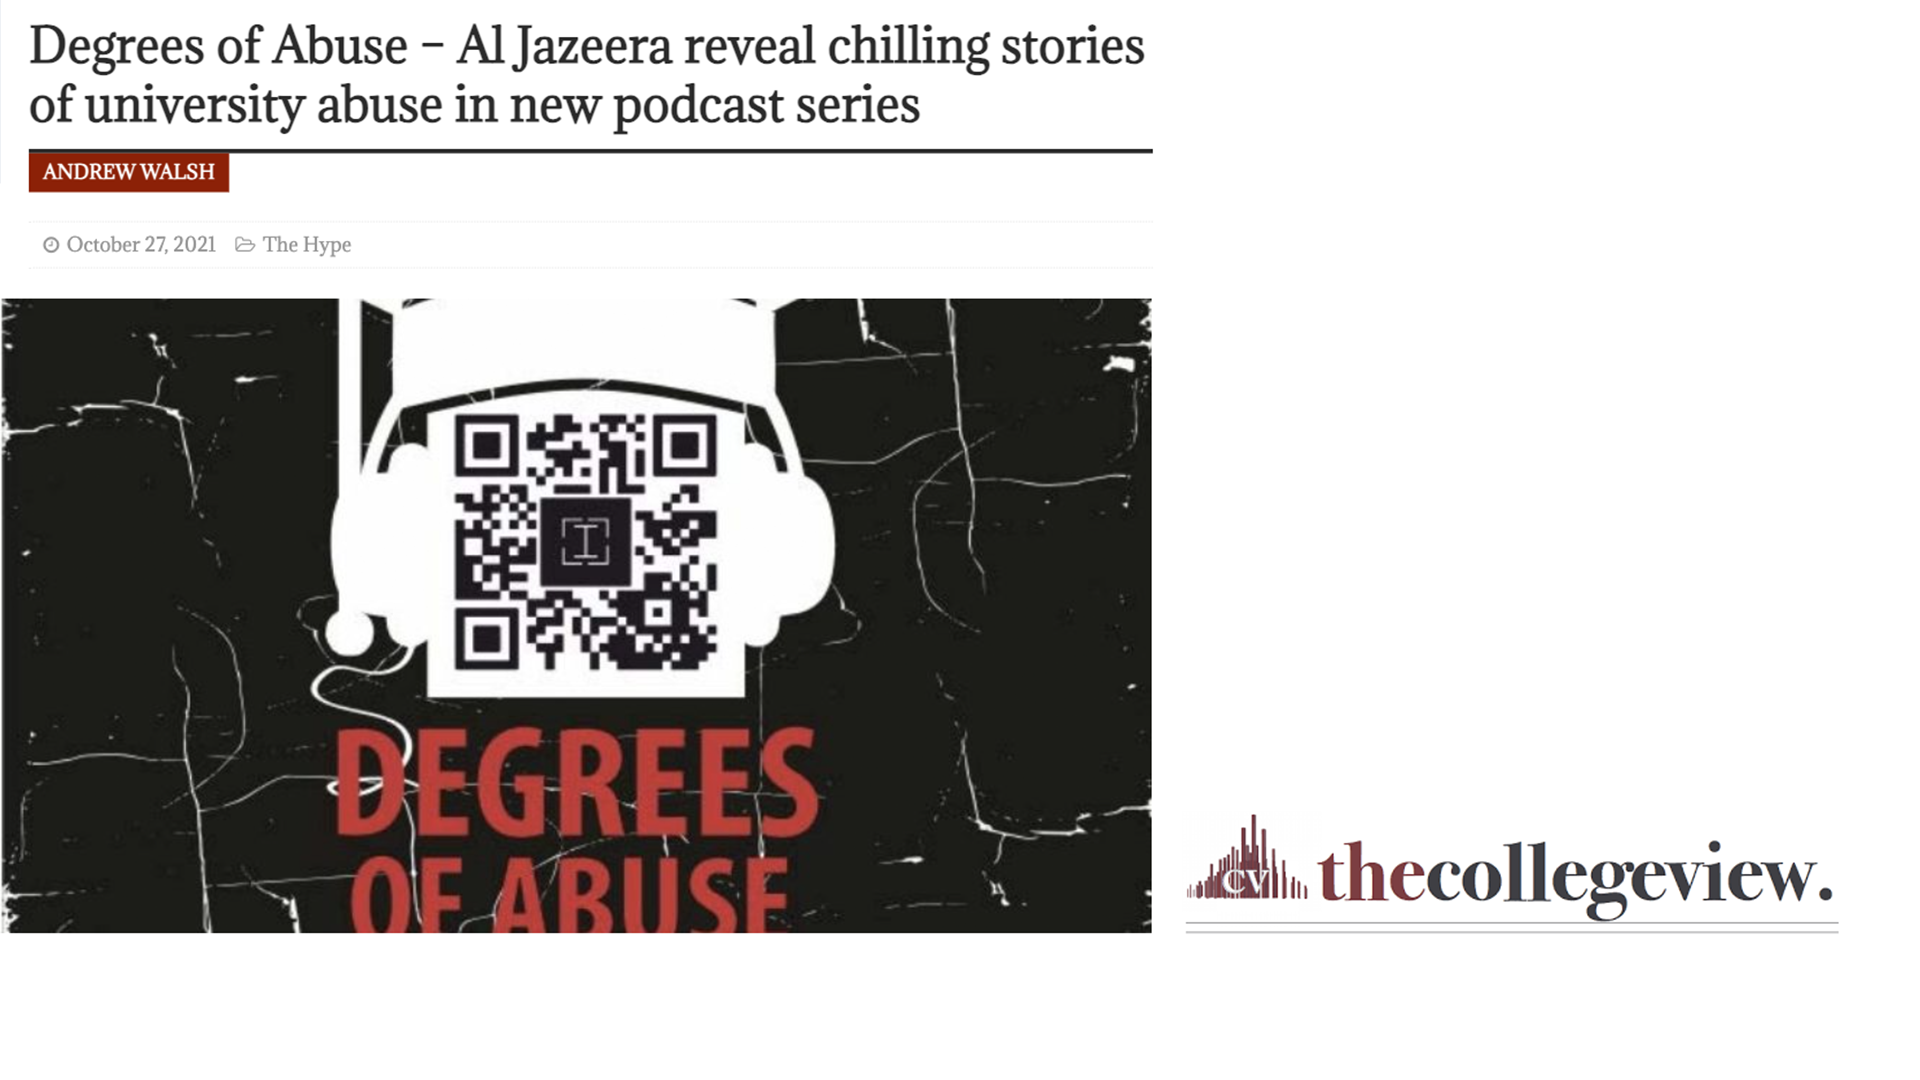 Al Jazeera reveal chilling stories of university abuse in new podcast series